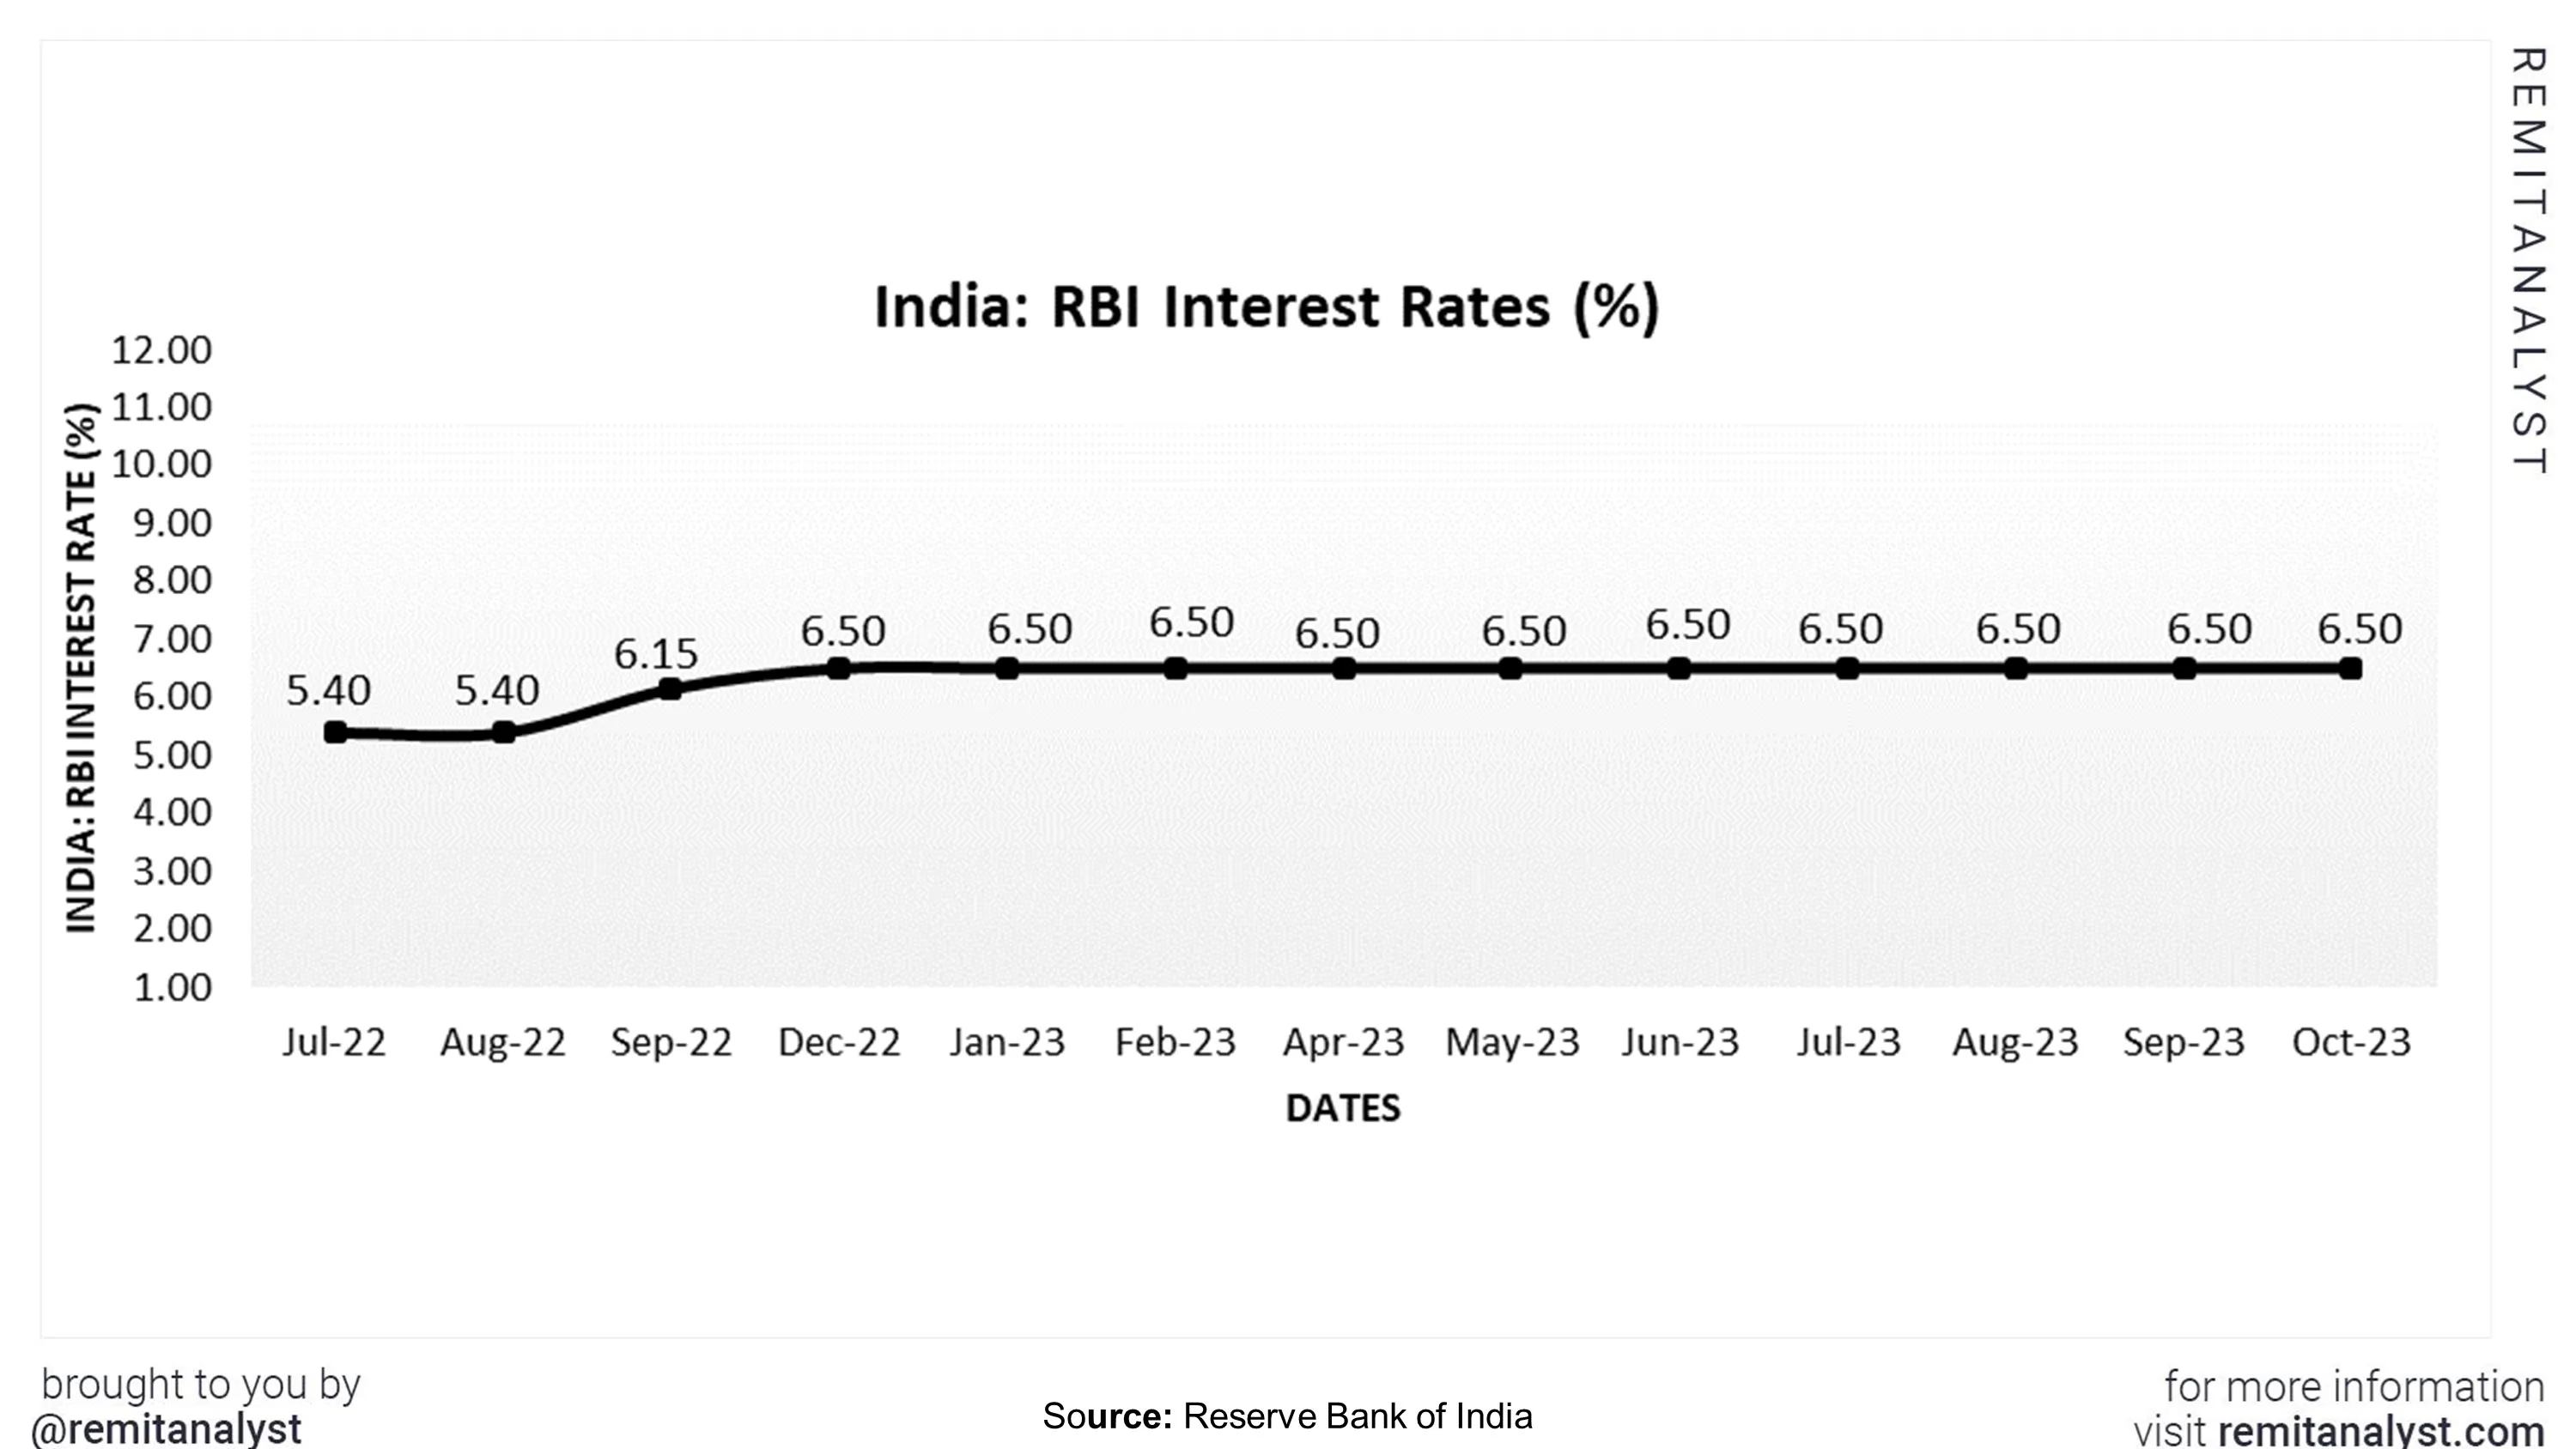 interest-rates-in-india-from-jul-2022-to-oct-2023